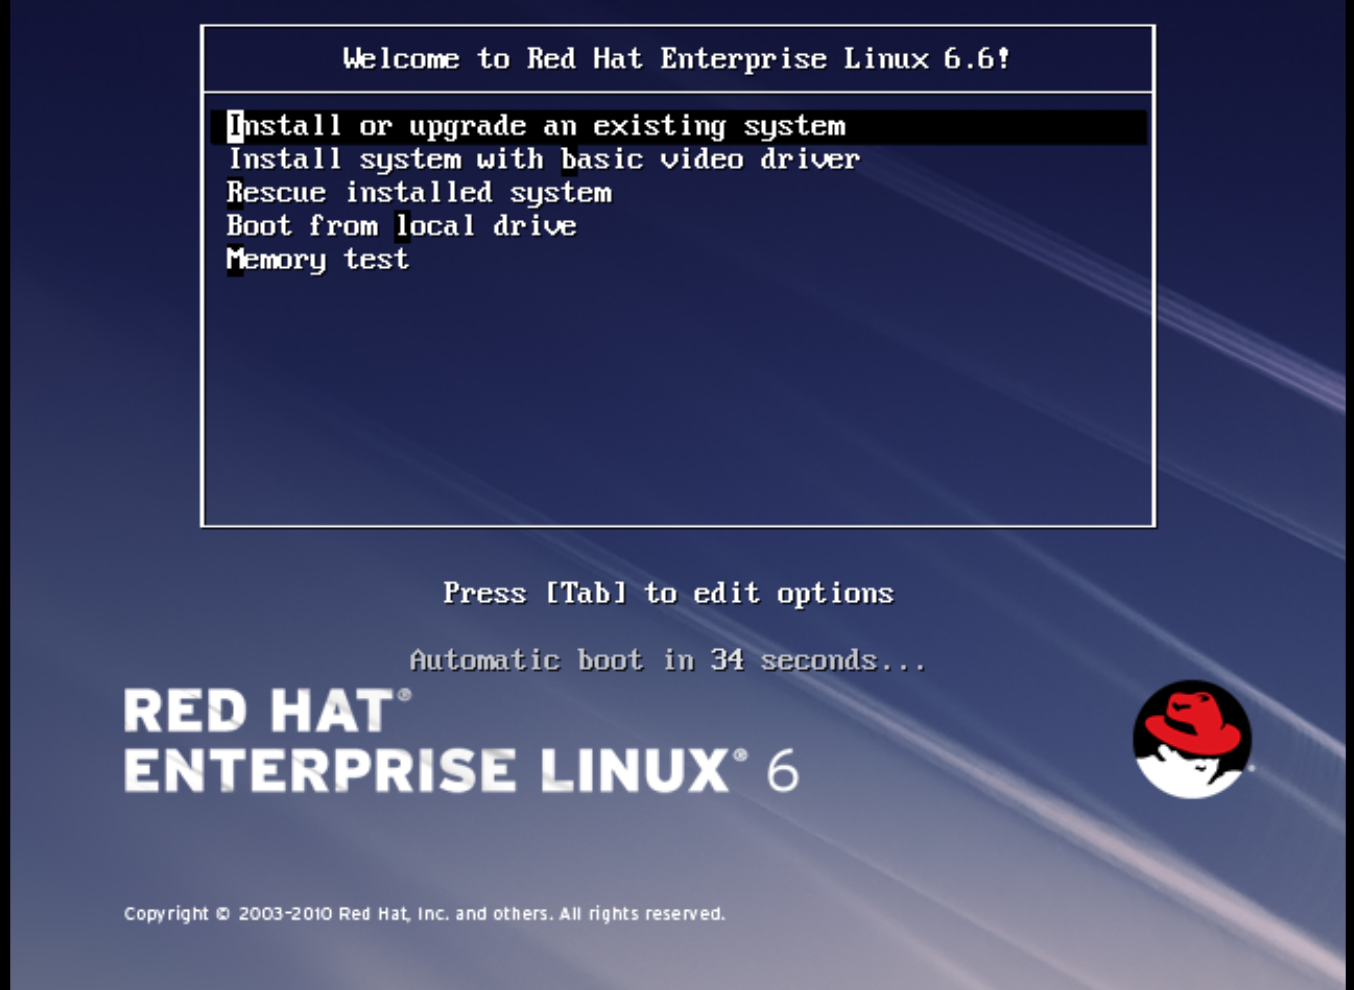 what version of redhat linux am i running